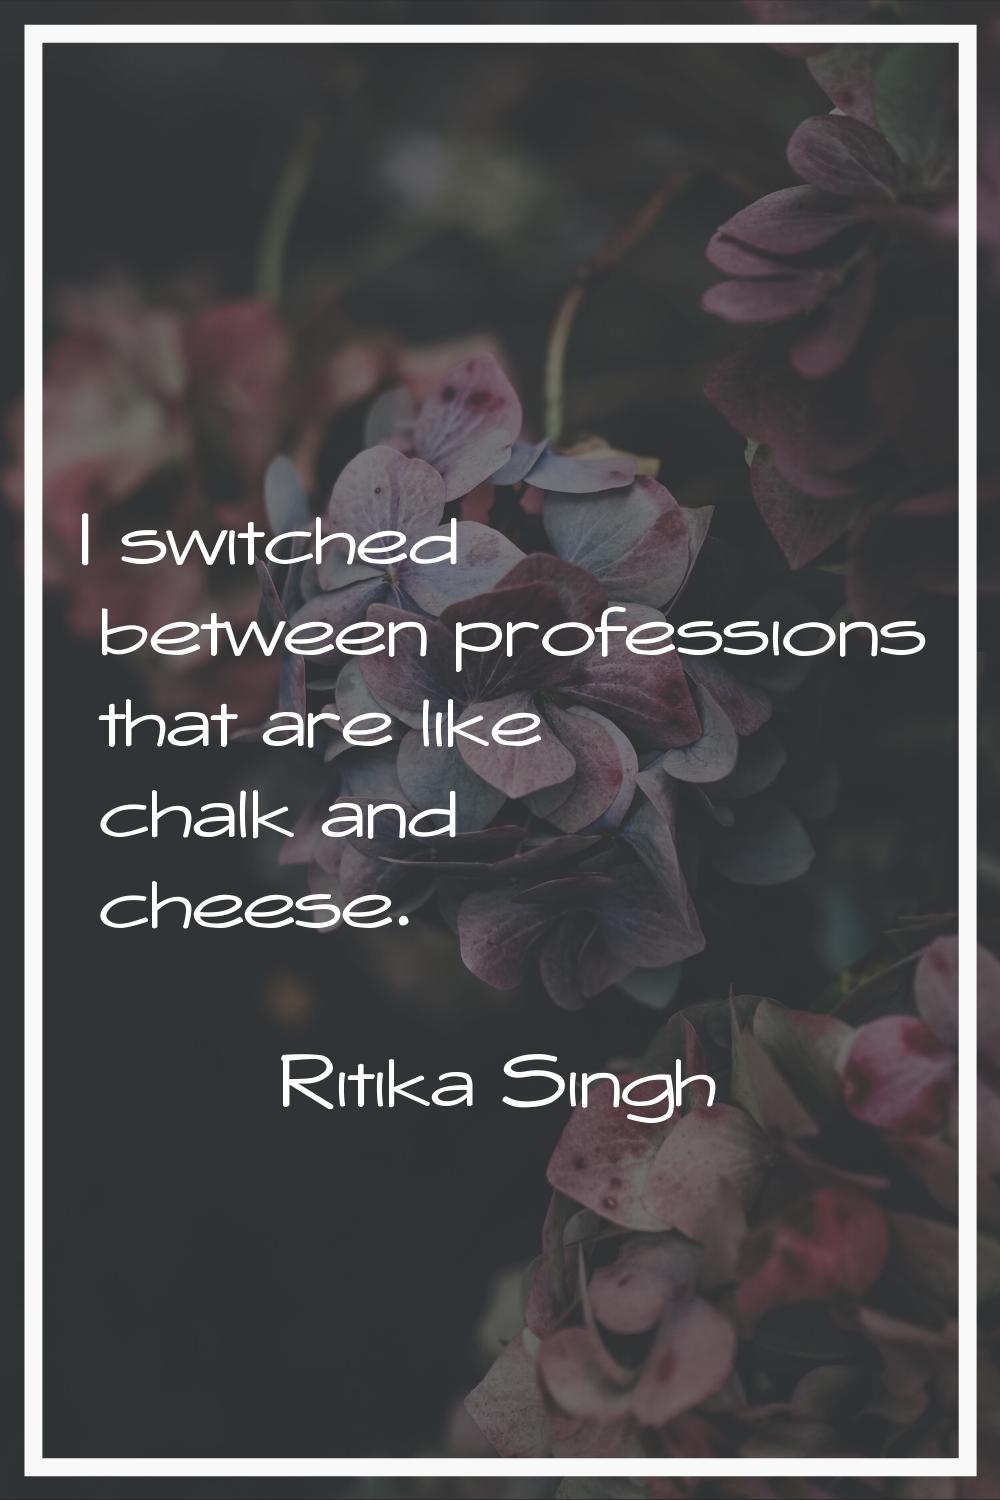 I switched between professions that are like chalk and cheese.